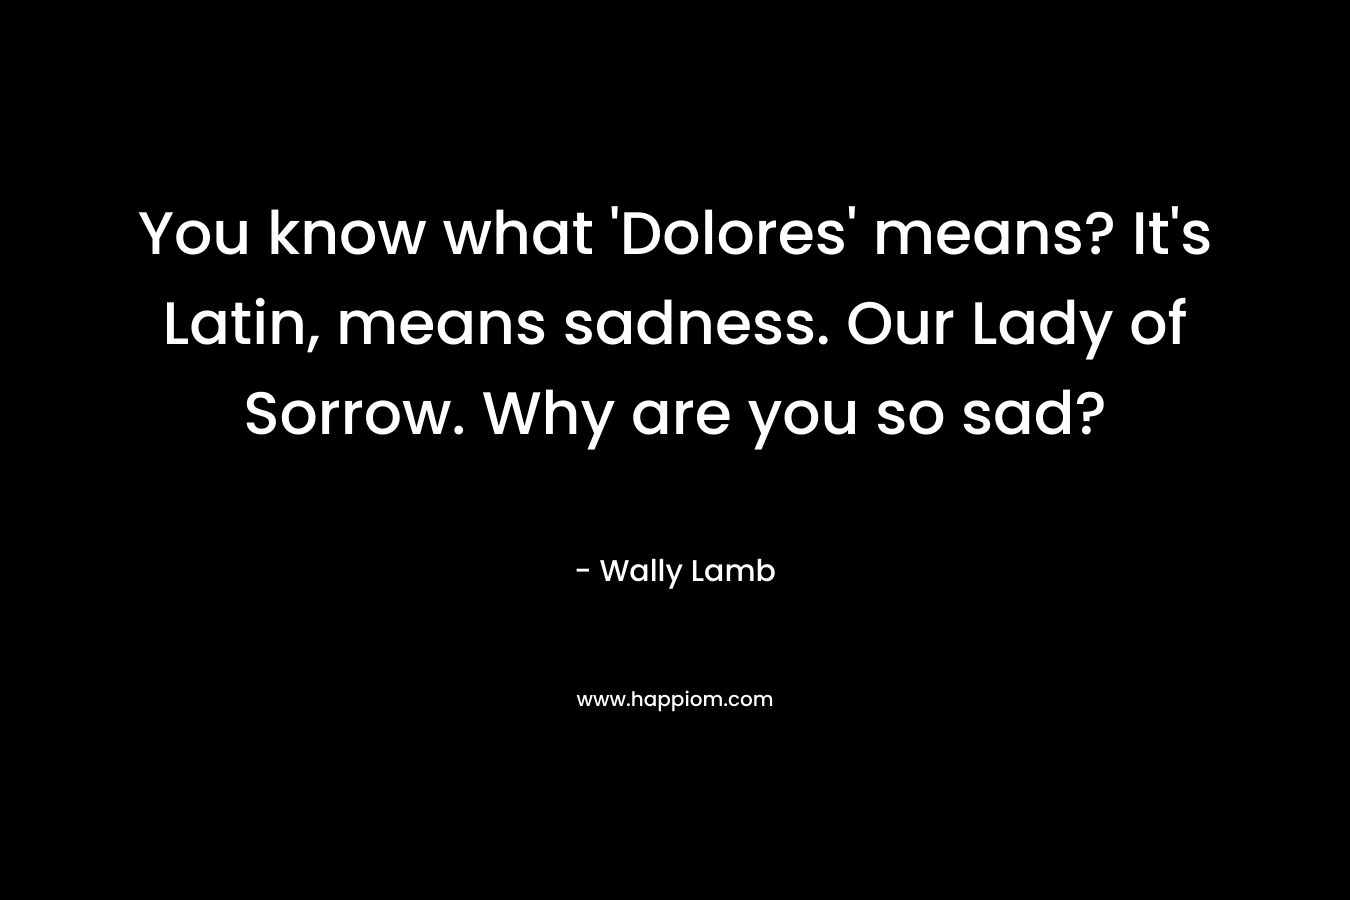 You know what 'Dolores' means? It's Latin, means sadness. Our Lady of Sorrow. Why are you so sad?